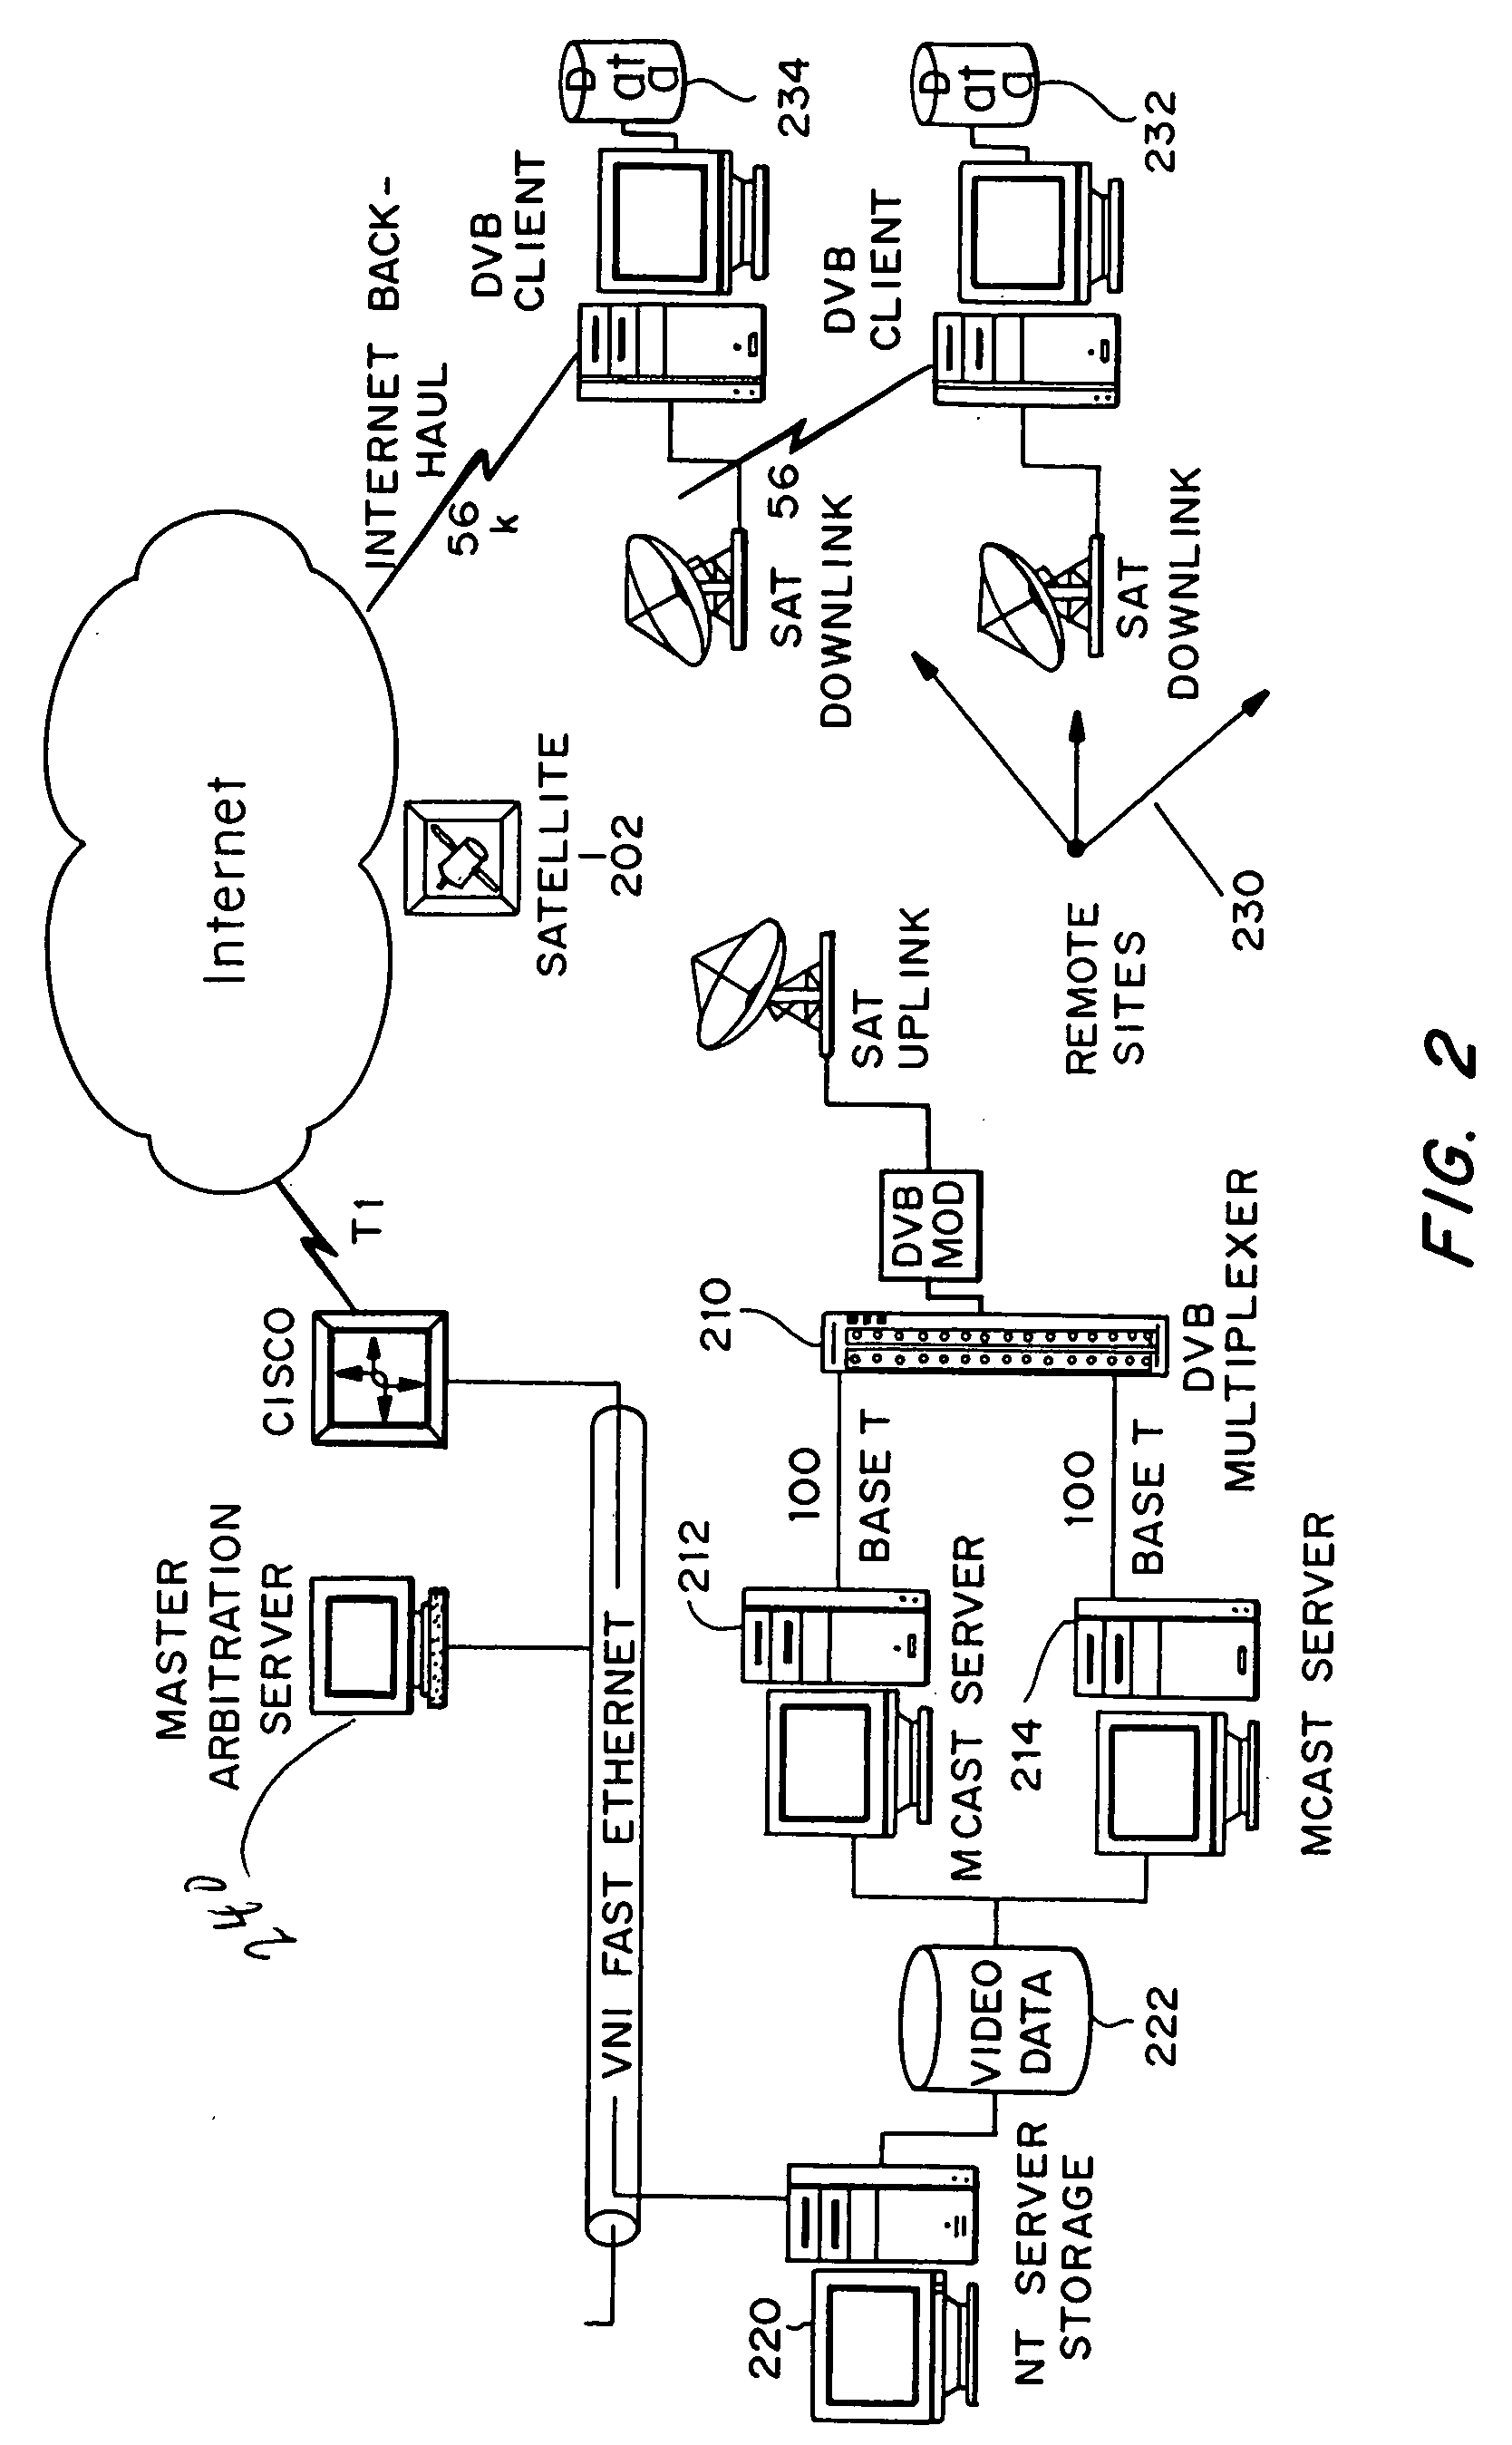 Multicast control systems and methods for dynamic, adaptive time, bandwidth,frequency, and satellite allocations